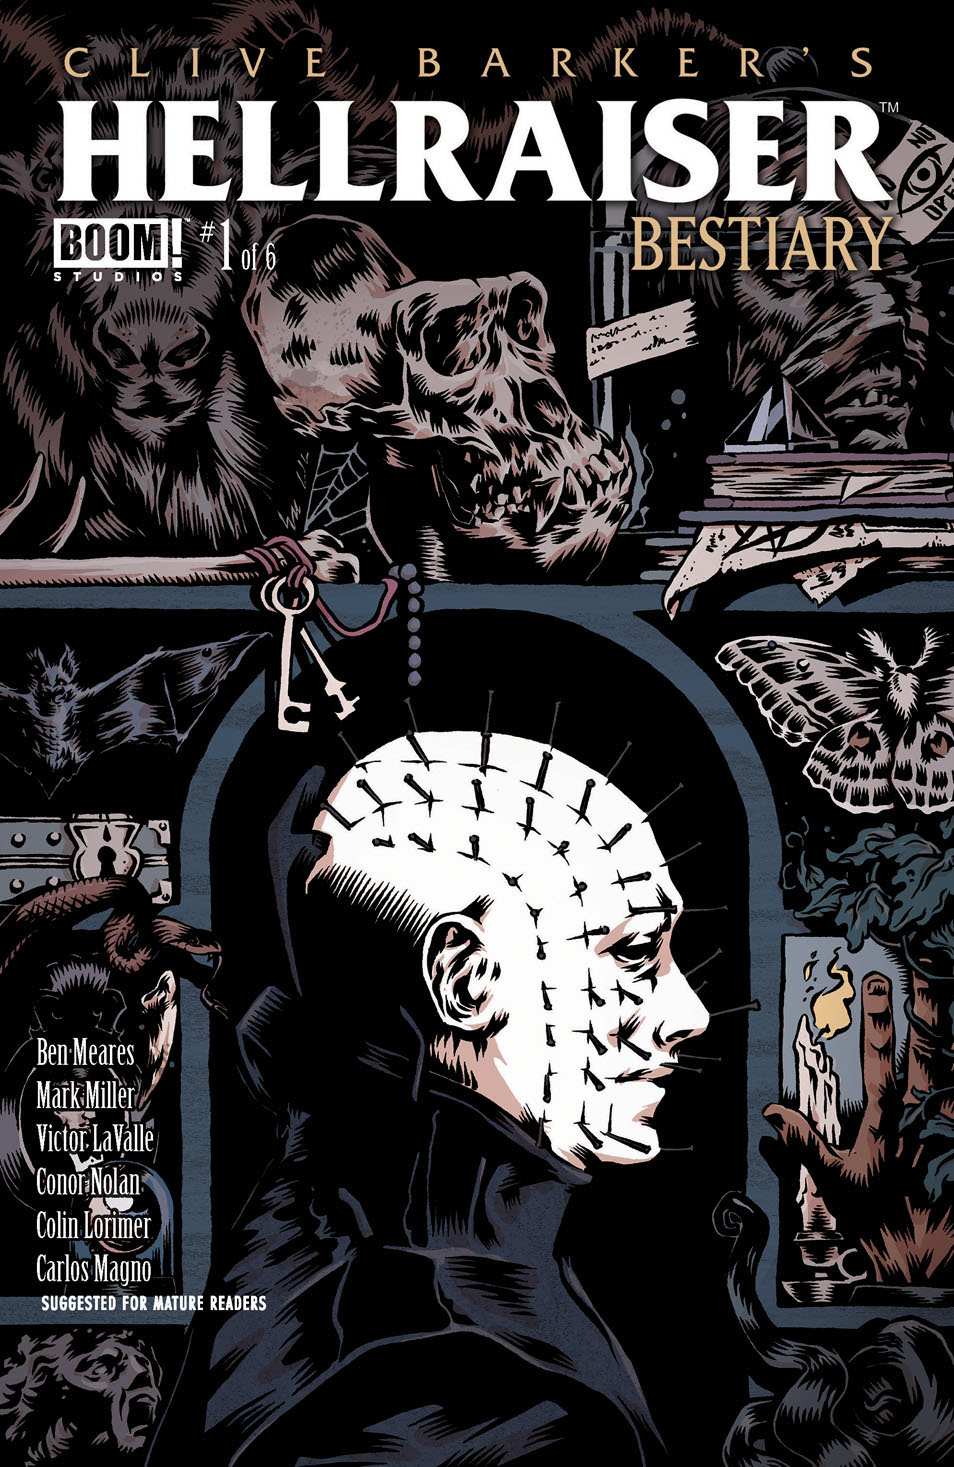 Clive Barker&#x27;s Hellraiser Bestiary #1, Clive Barker&#x27;s Hellraiser: Bestiary